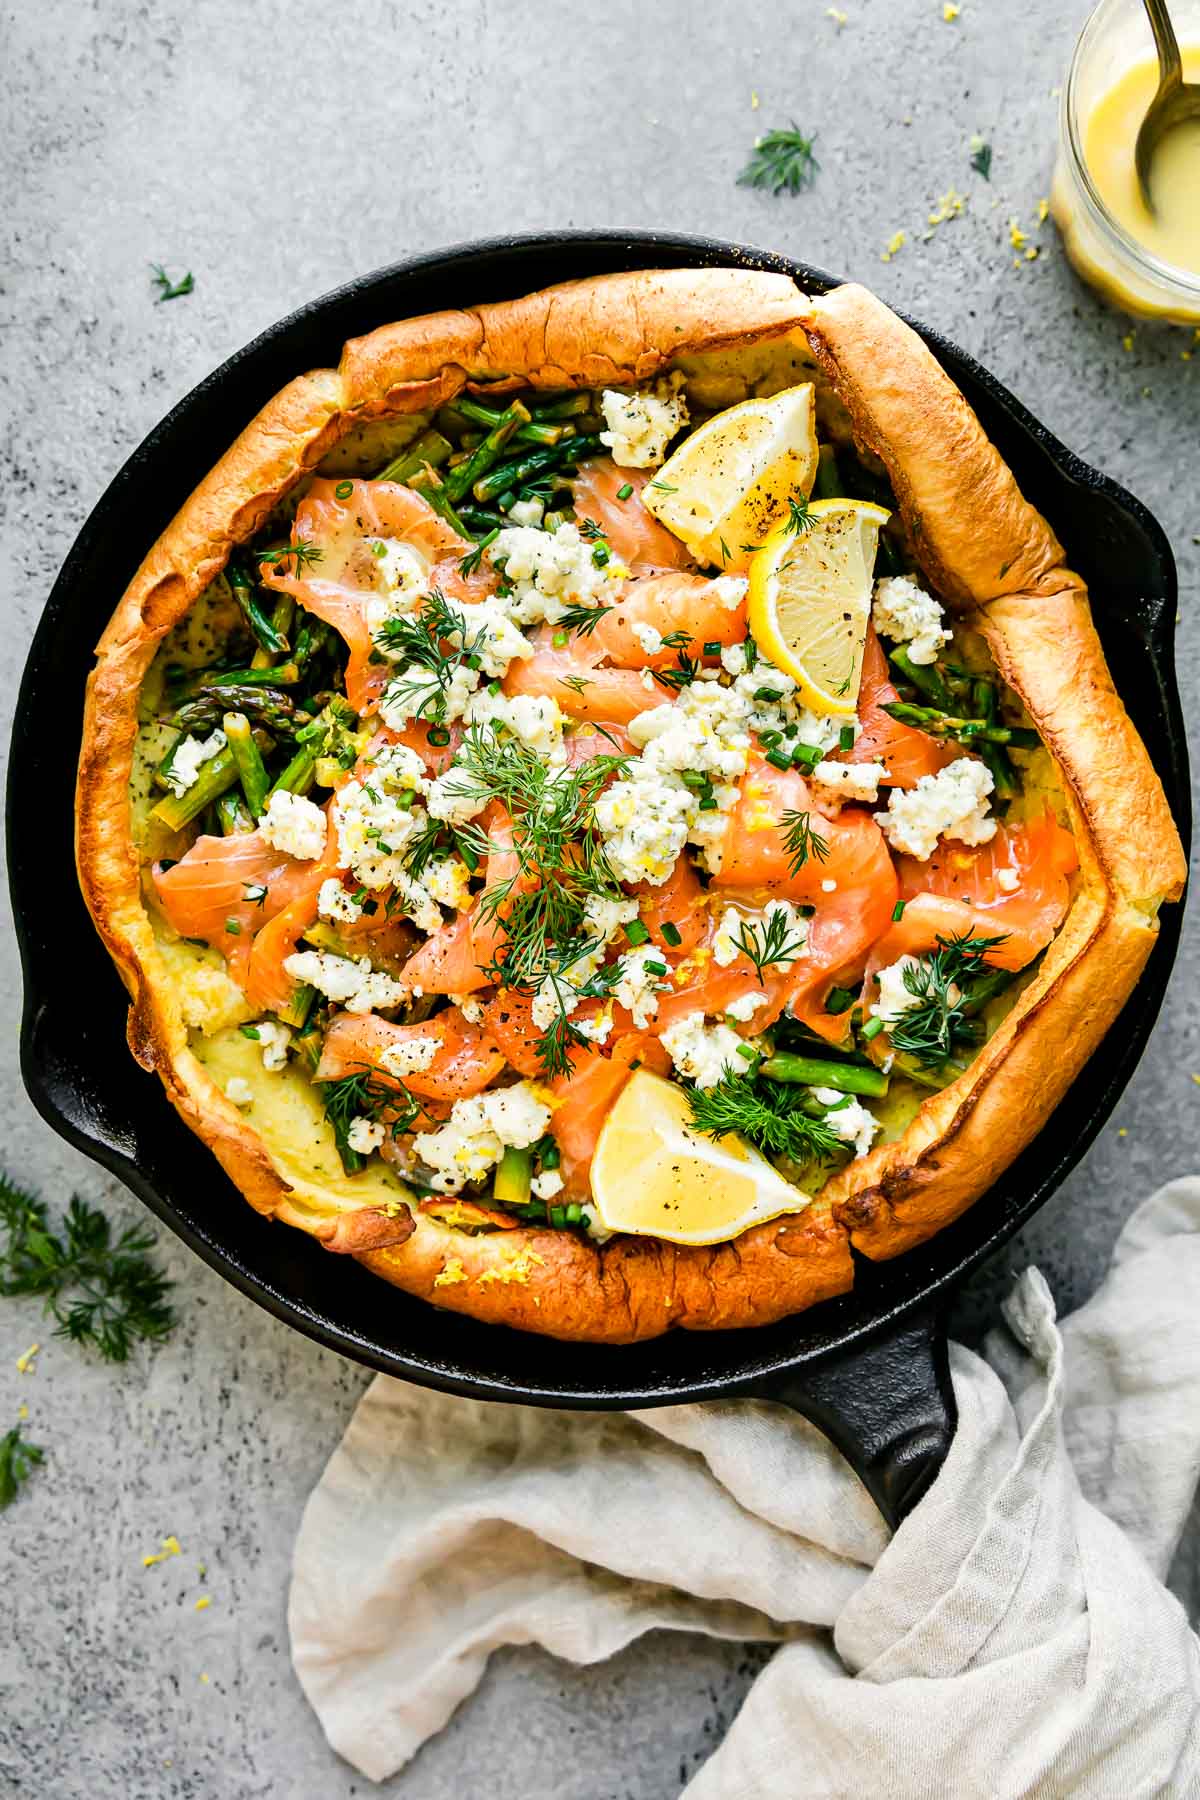 An assembled Dutch baby topped with smoked salmon, asparagus, and a Boursin cheese fills a large black cast iron skillet. The Dutch baby is garnished with lemon wedges, a lemon butter sauce, and fresh herbs. The skillet sits atop a light gray textured surface with a light cream linen napkin tied around the skillet handle. A lemon butter sauce fills a small glass bowl & rests alongside the skillet at center.